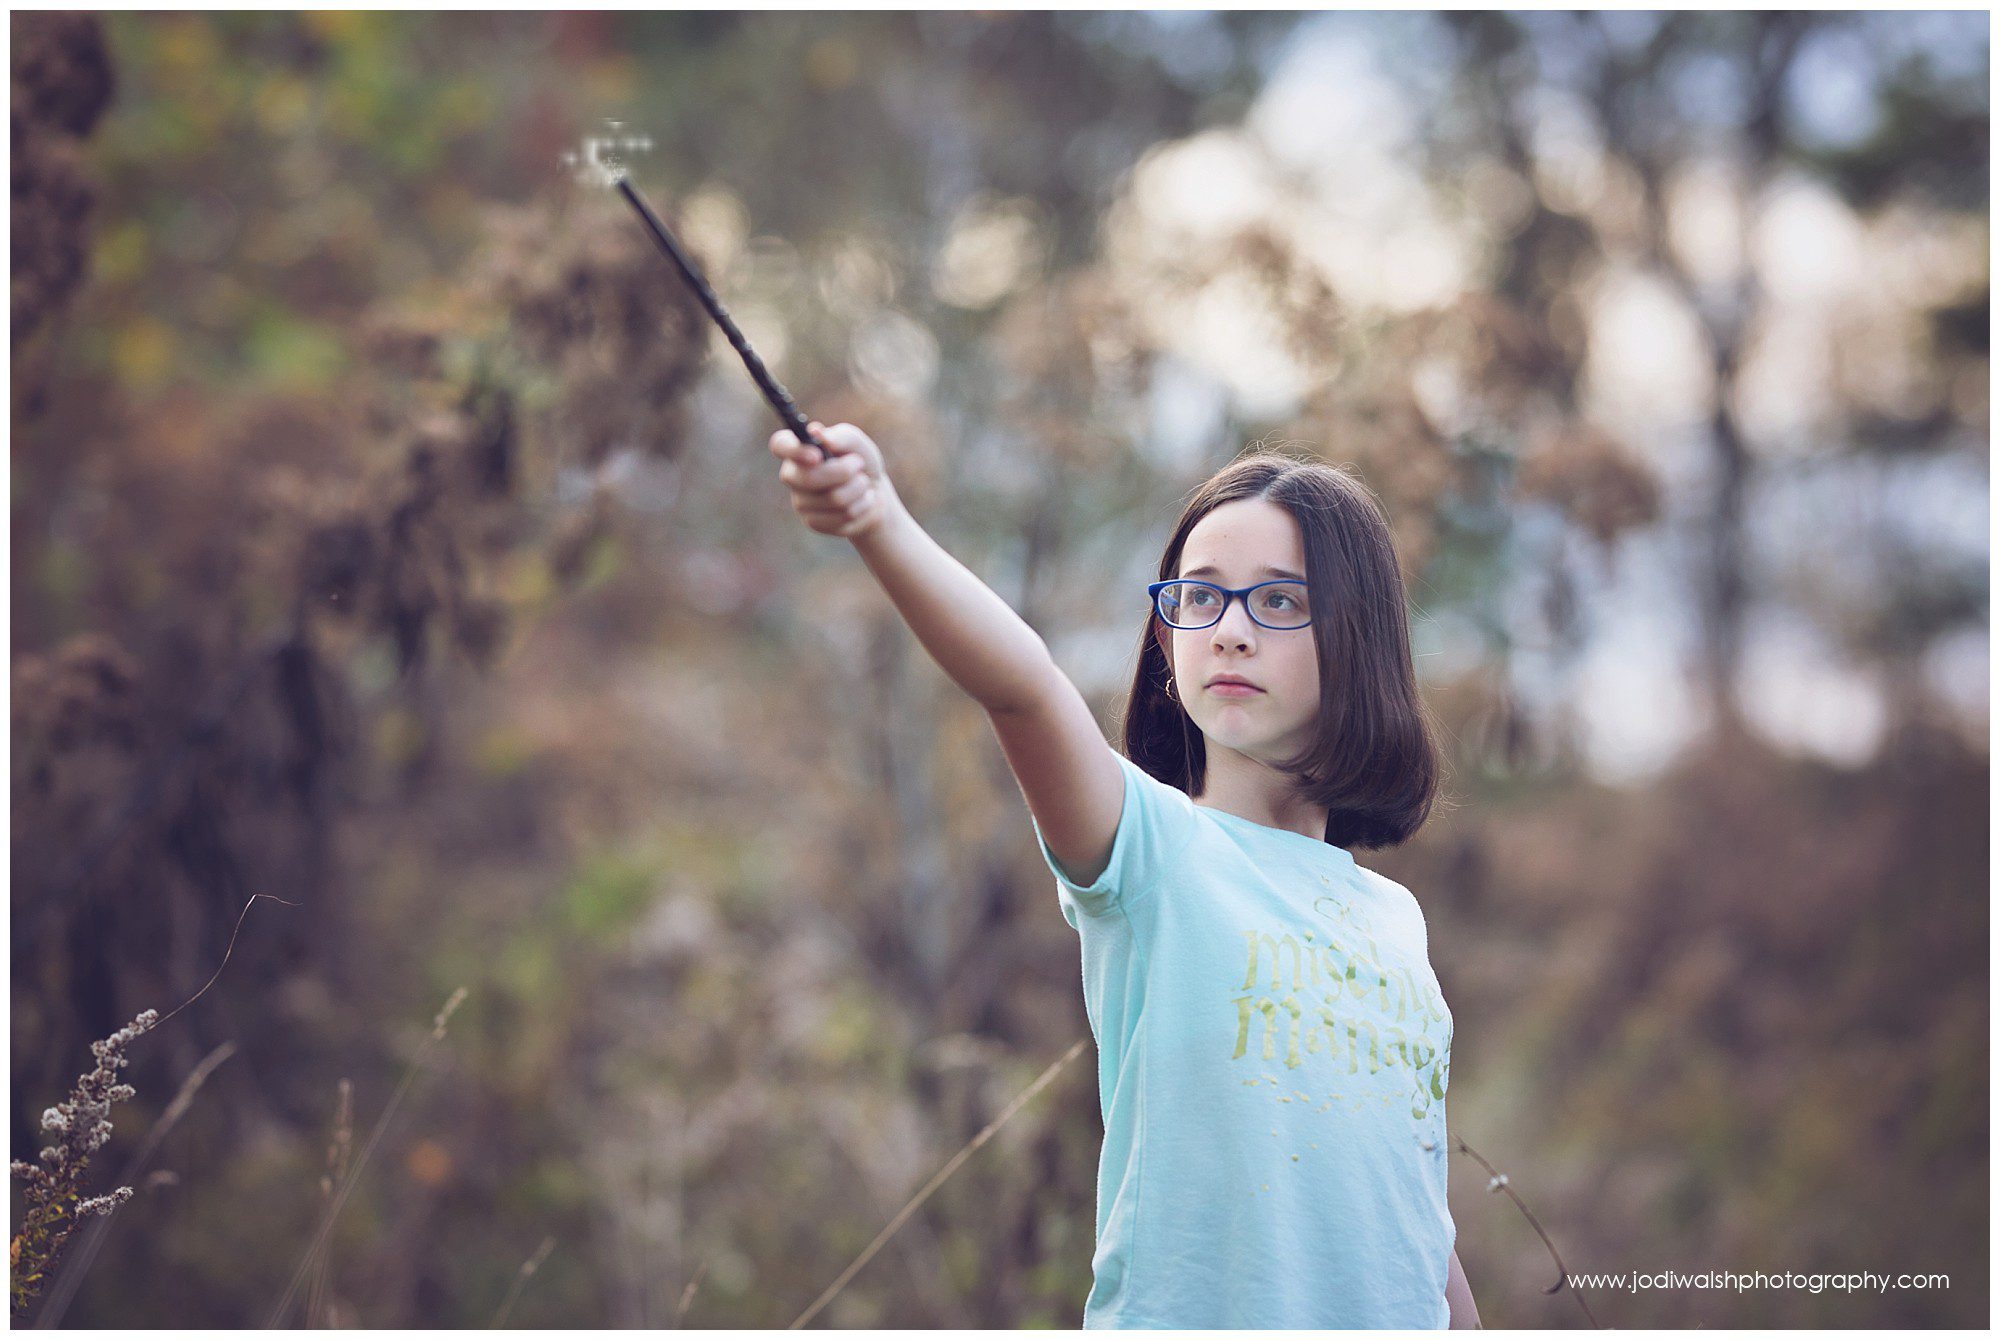 tween girl with Harry Potter wand and sparks